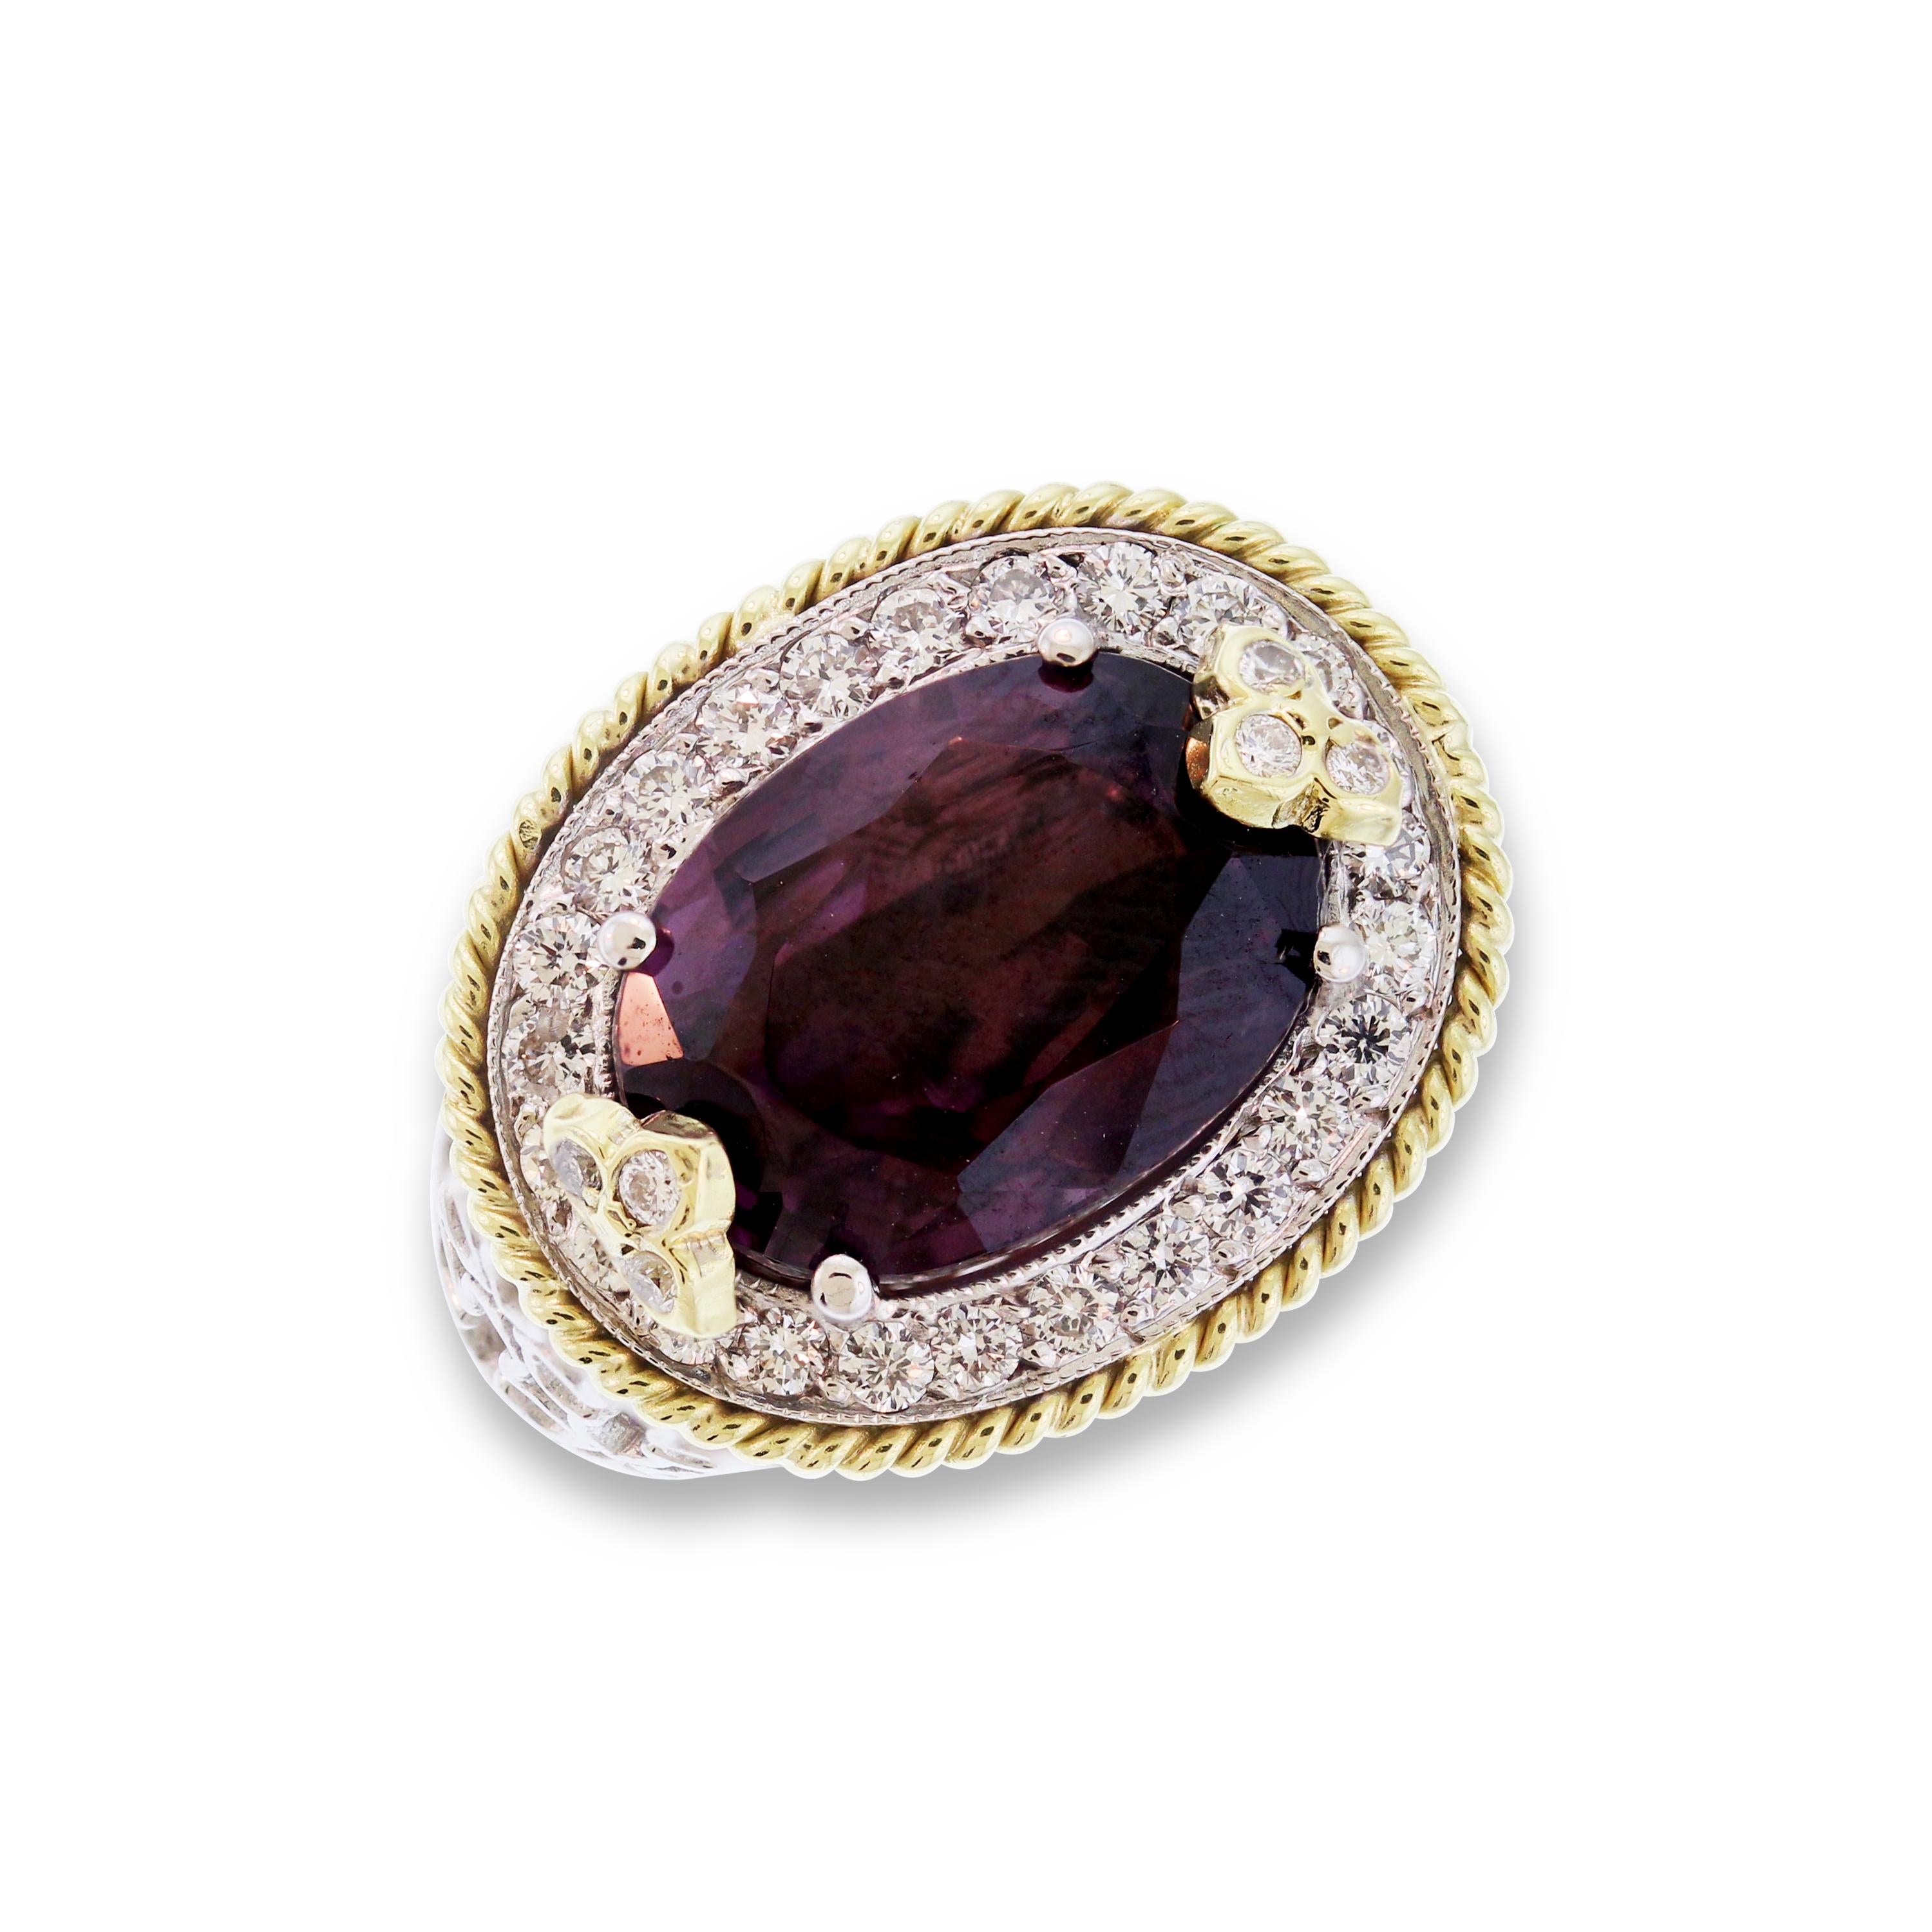 Women's Stambolian Two-Tone Gold and Diamond Ring with Purple Spinel Center